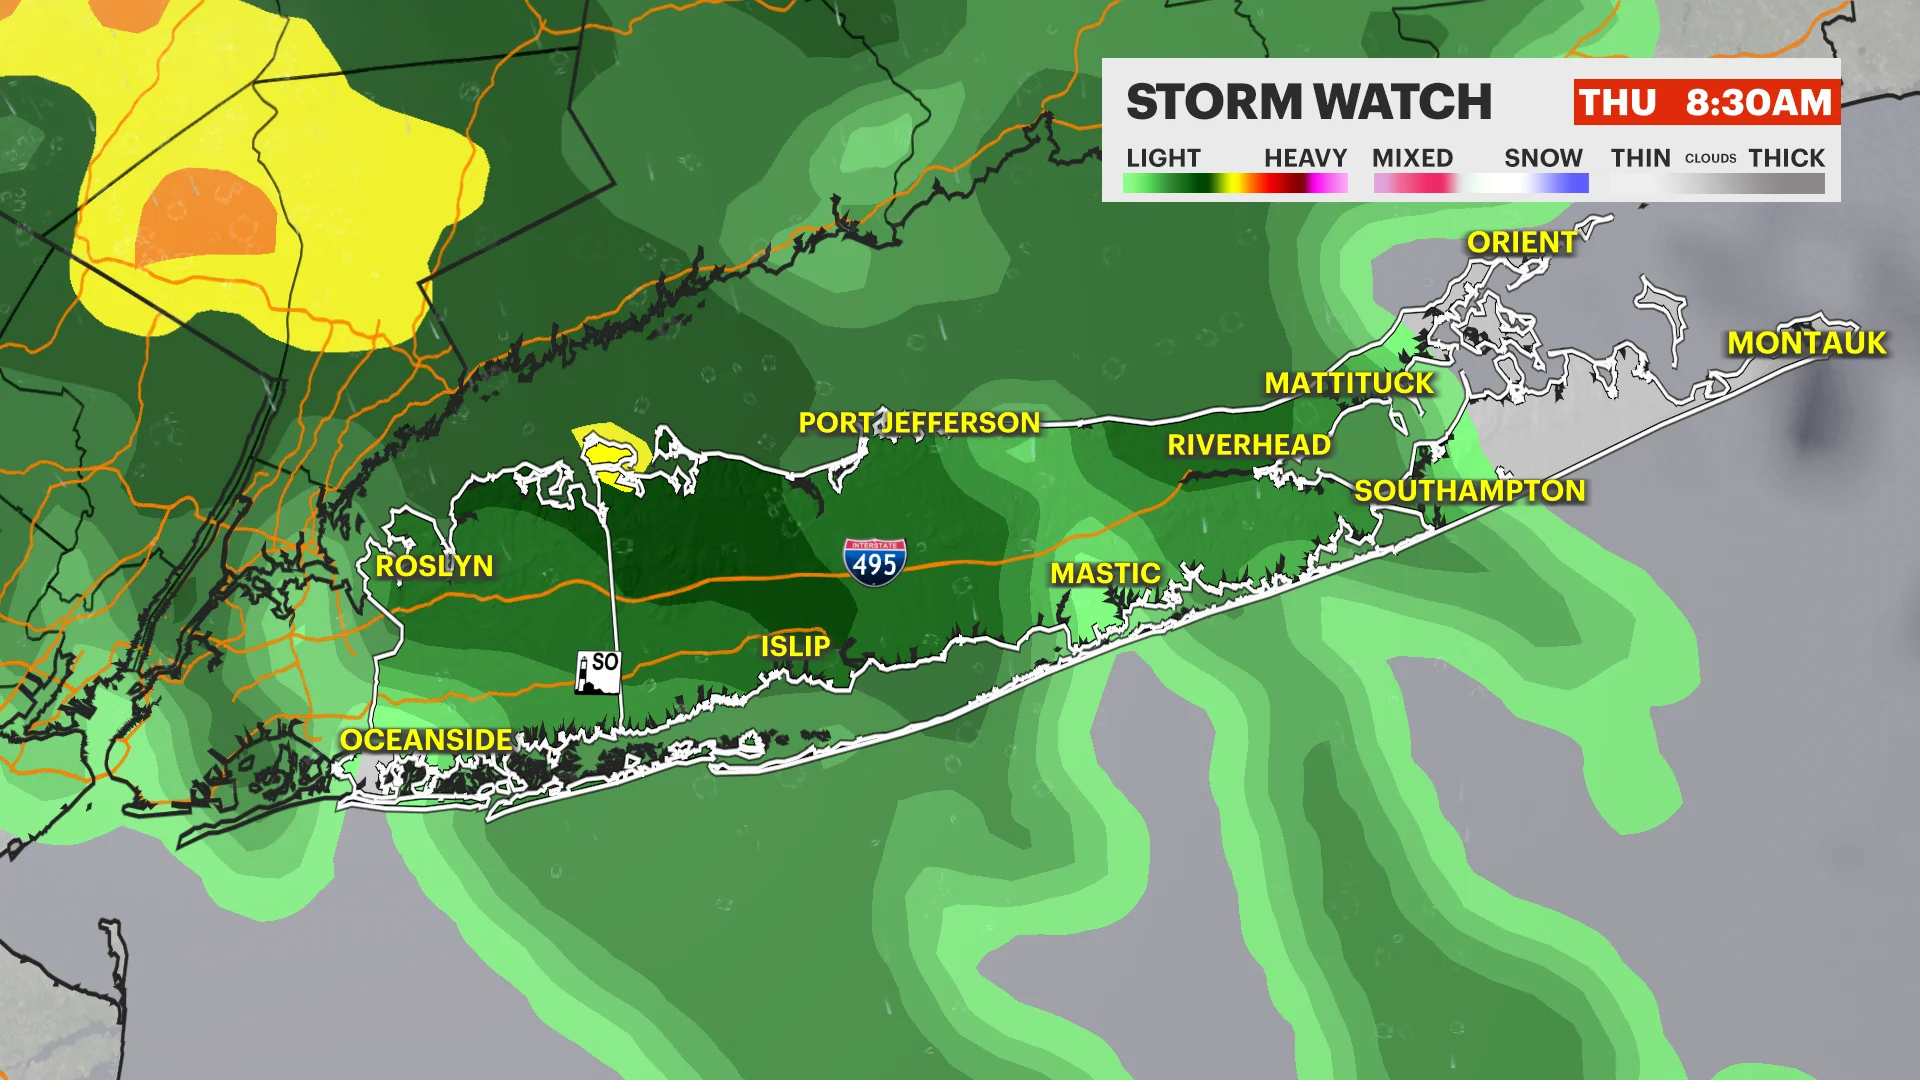 STORM WATCH: Lots of clouds today. Unsettled weather with heavy rain to end the workweek